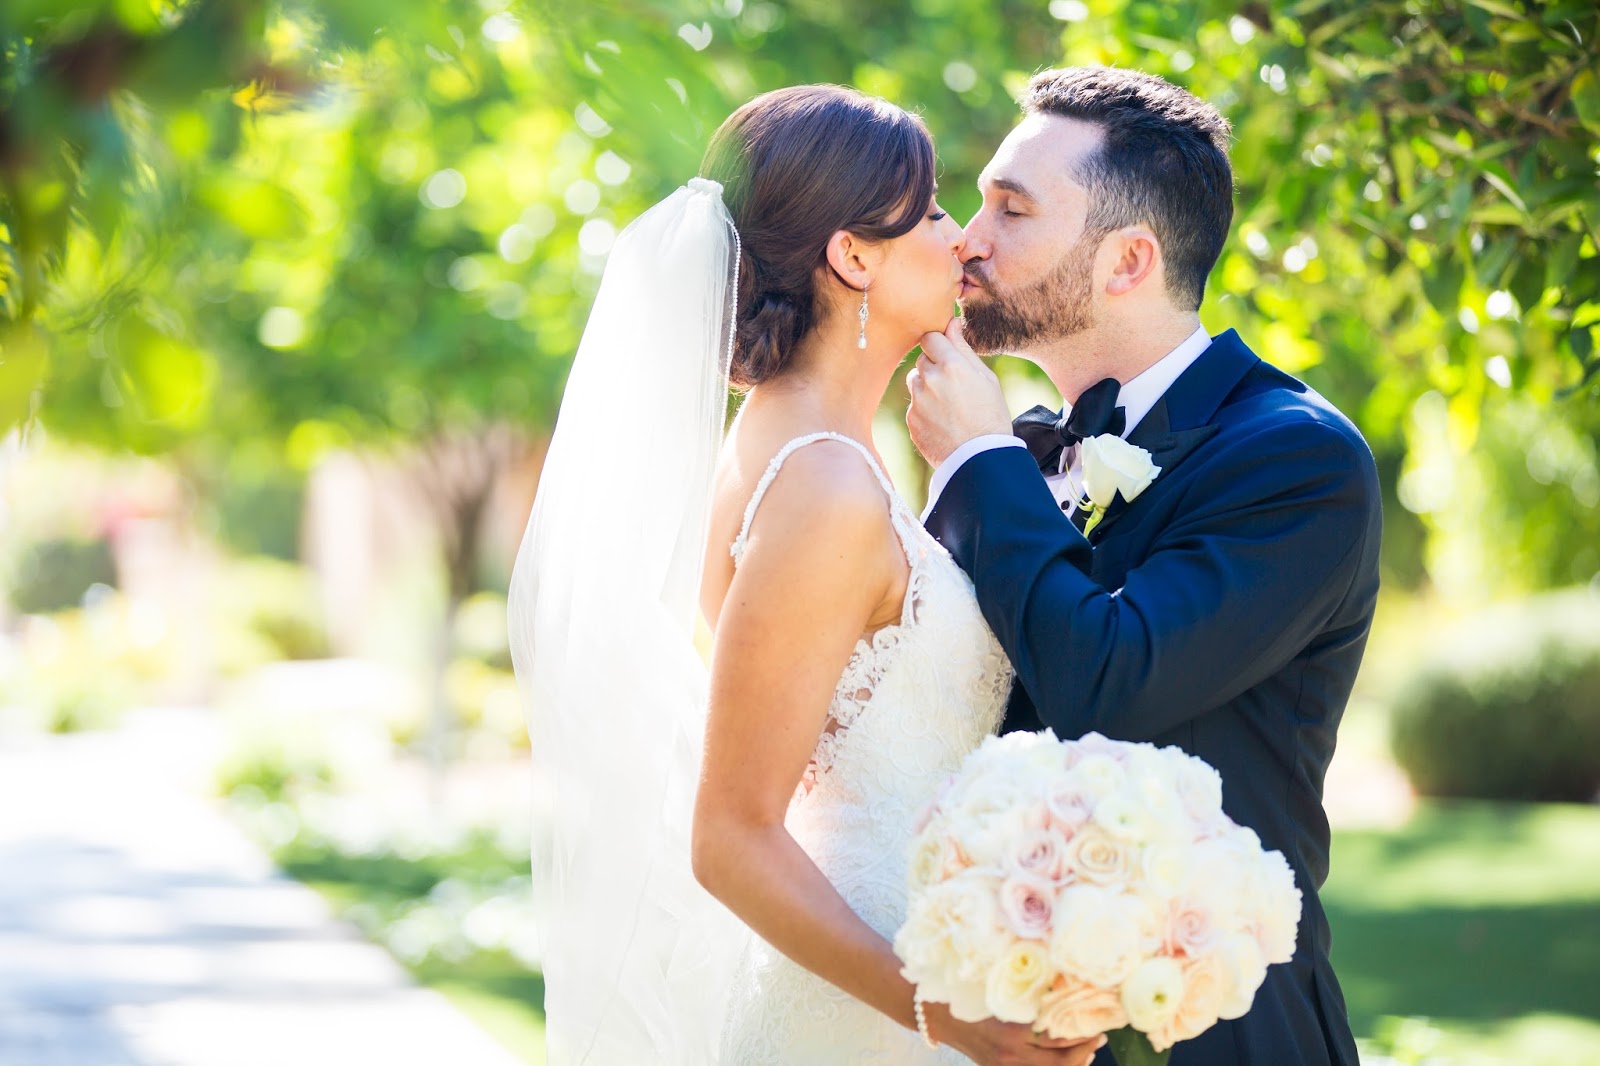 classic romantic bride with white and blush roses wedding bouquet kissing groom in navy suit at Omni Montelucia